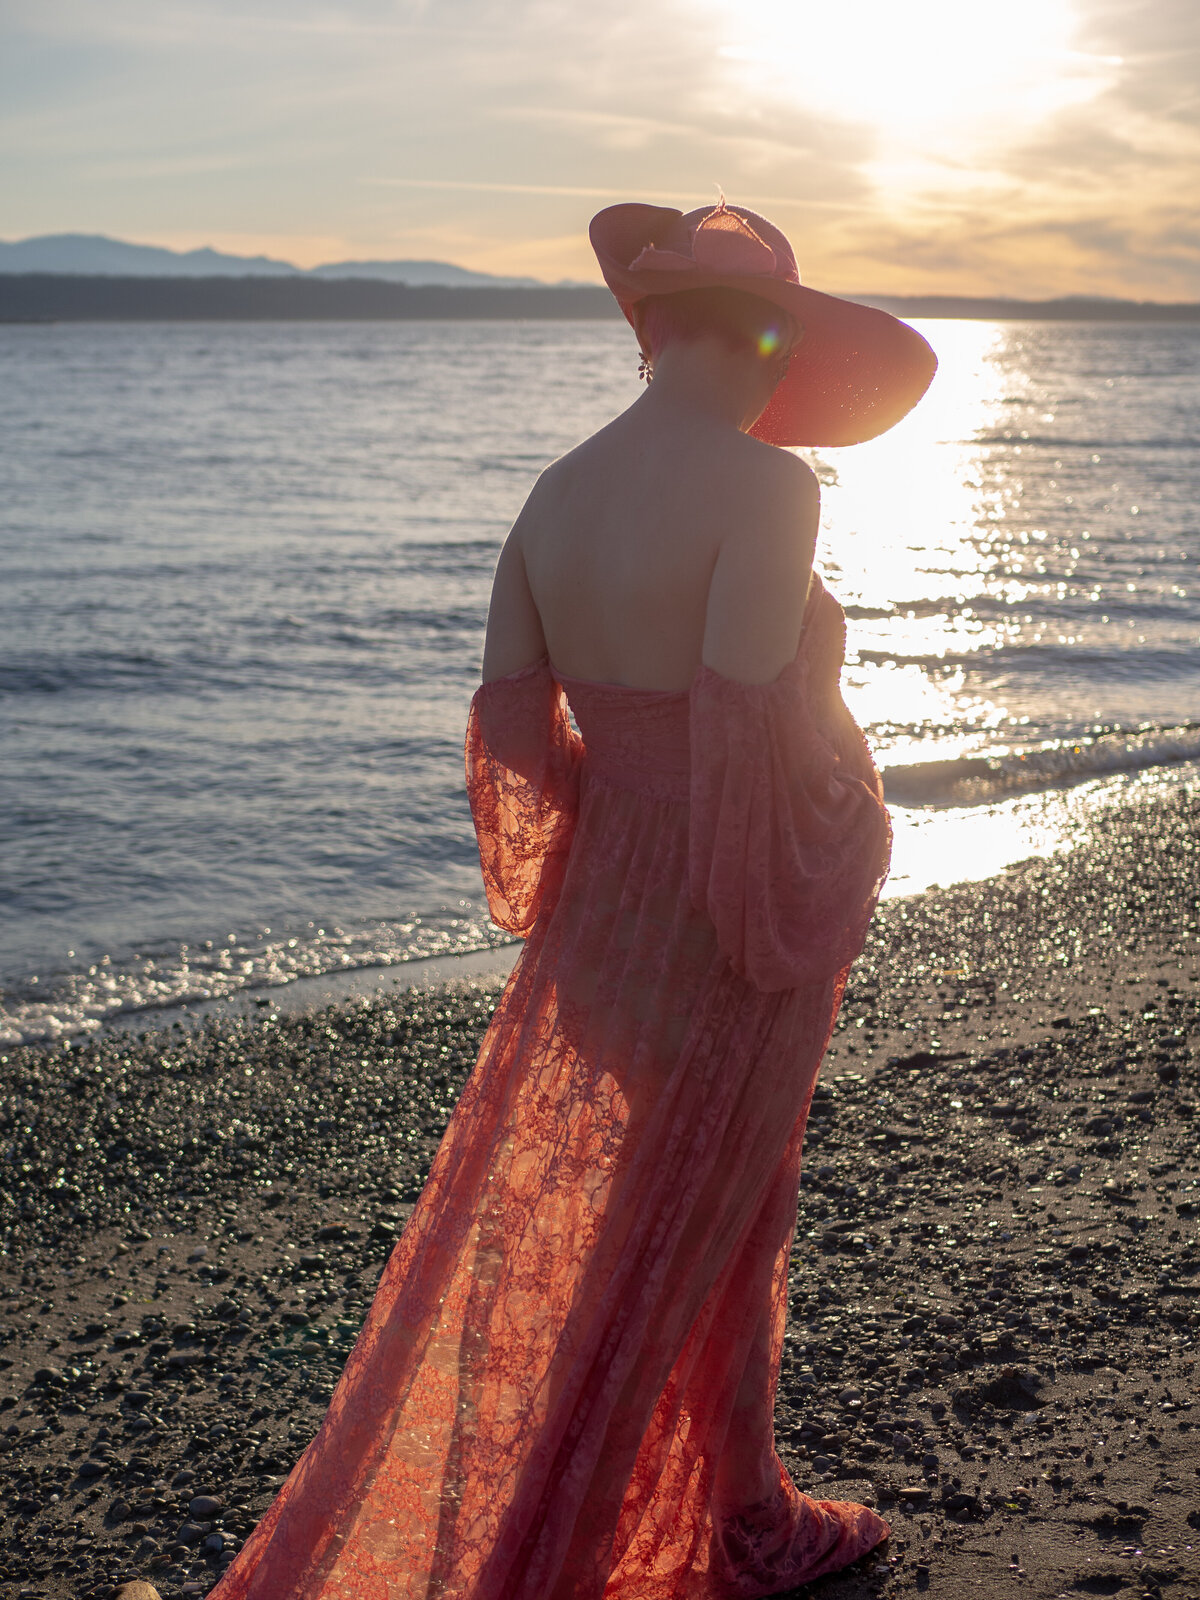 A pregnant person weaering a pink, lacy dress walks along the Sound at sunset in Edmonds, WA.